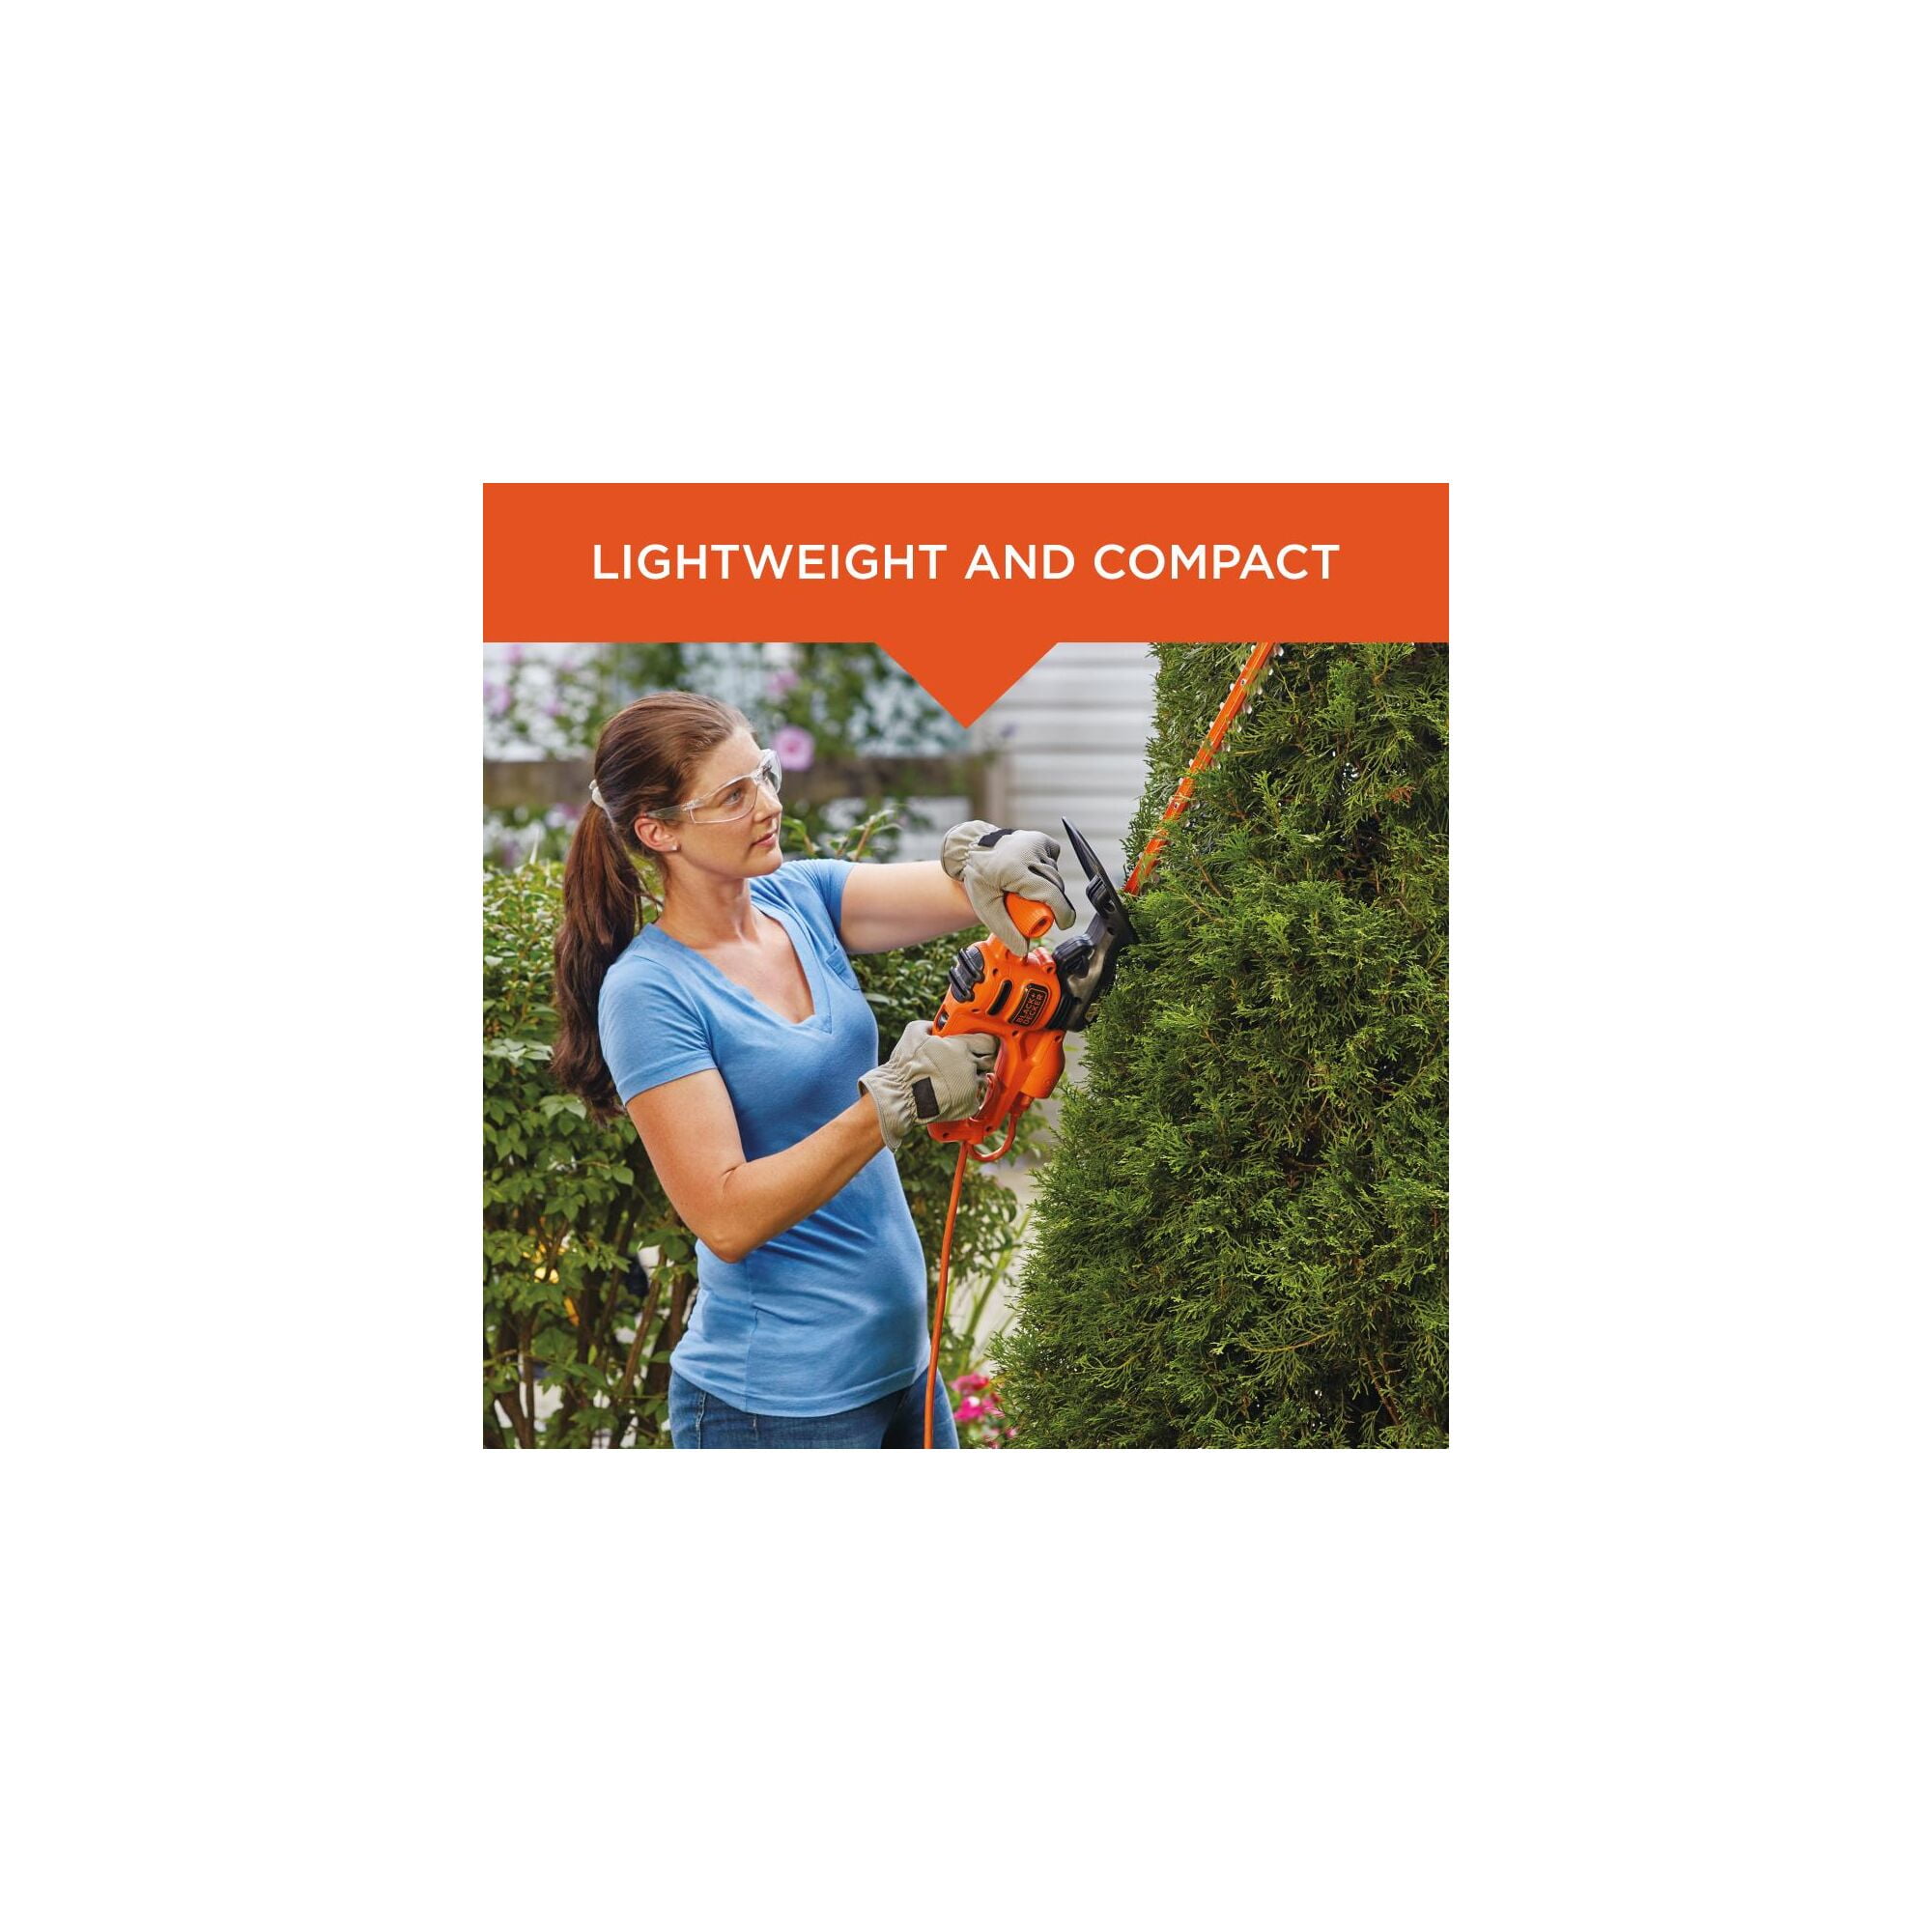 Black & Decker 17 Electric (Corded) Hedge Trimmer